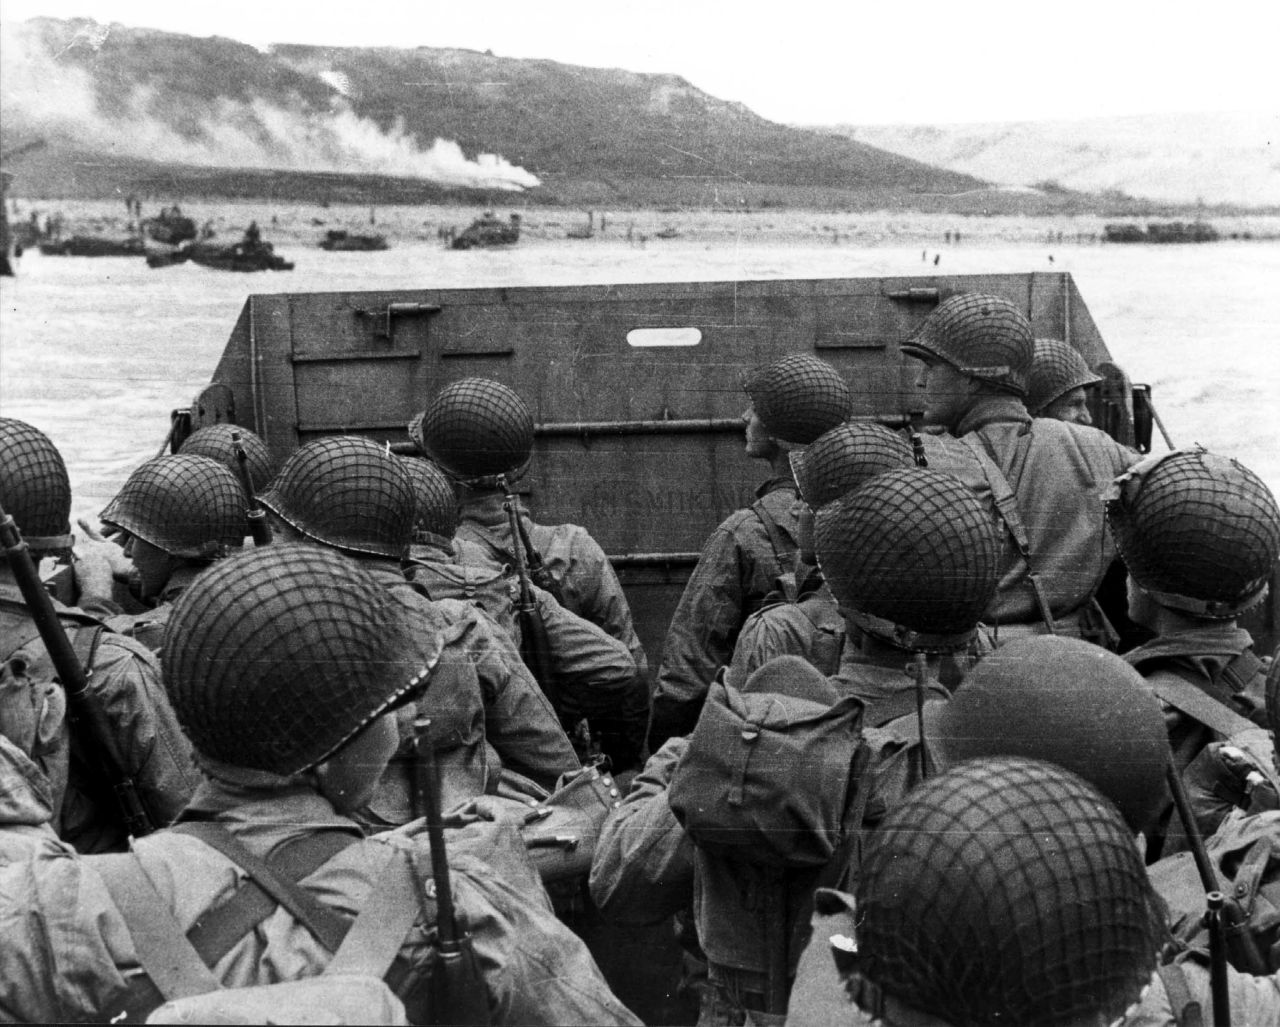 US troops huddle behind the protective front of their landing craft as it nears a beachhead in France. Smoke in the background is naval gunfire giving cover to troops on land. Germans rained mortars and artillery down on Allied troops, killing many before they could even get out of their boats. Fighting was especially fierce at Omaha Beach, where Nazi fighters nearly wiped out the first wave of invading forces and left the survivors struggling for cover.